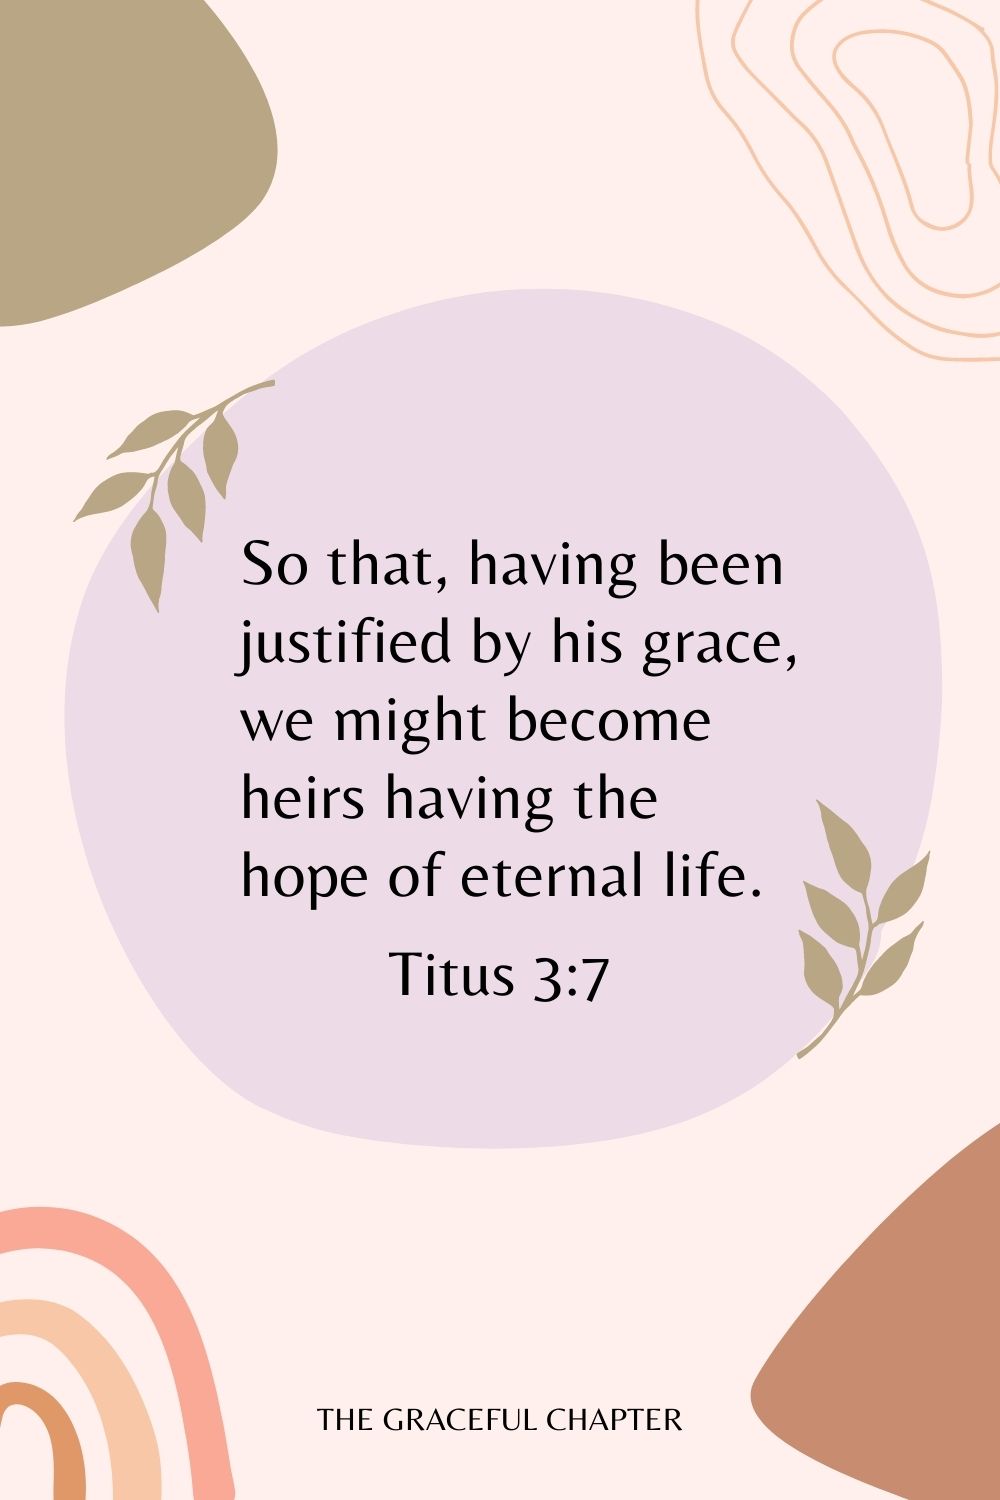 So that, having been justified by his grace, we might become heirs having the hope of eternal life. Titus 3:7